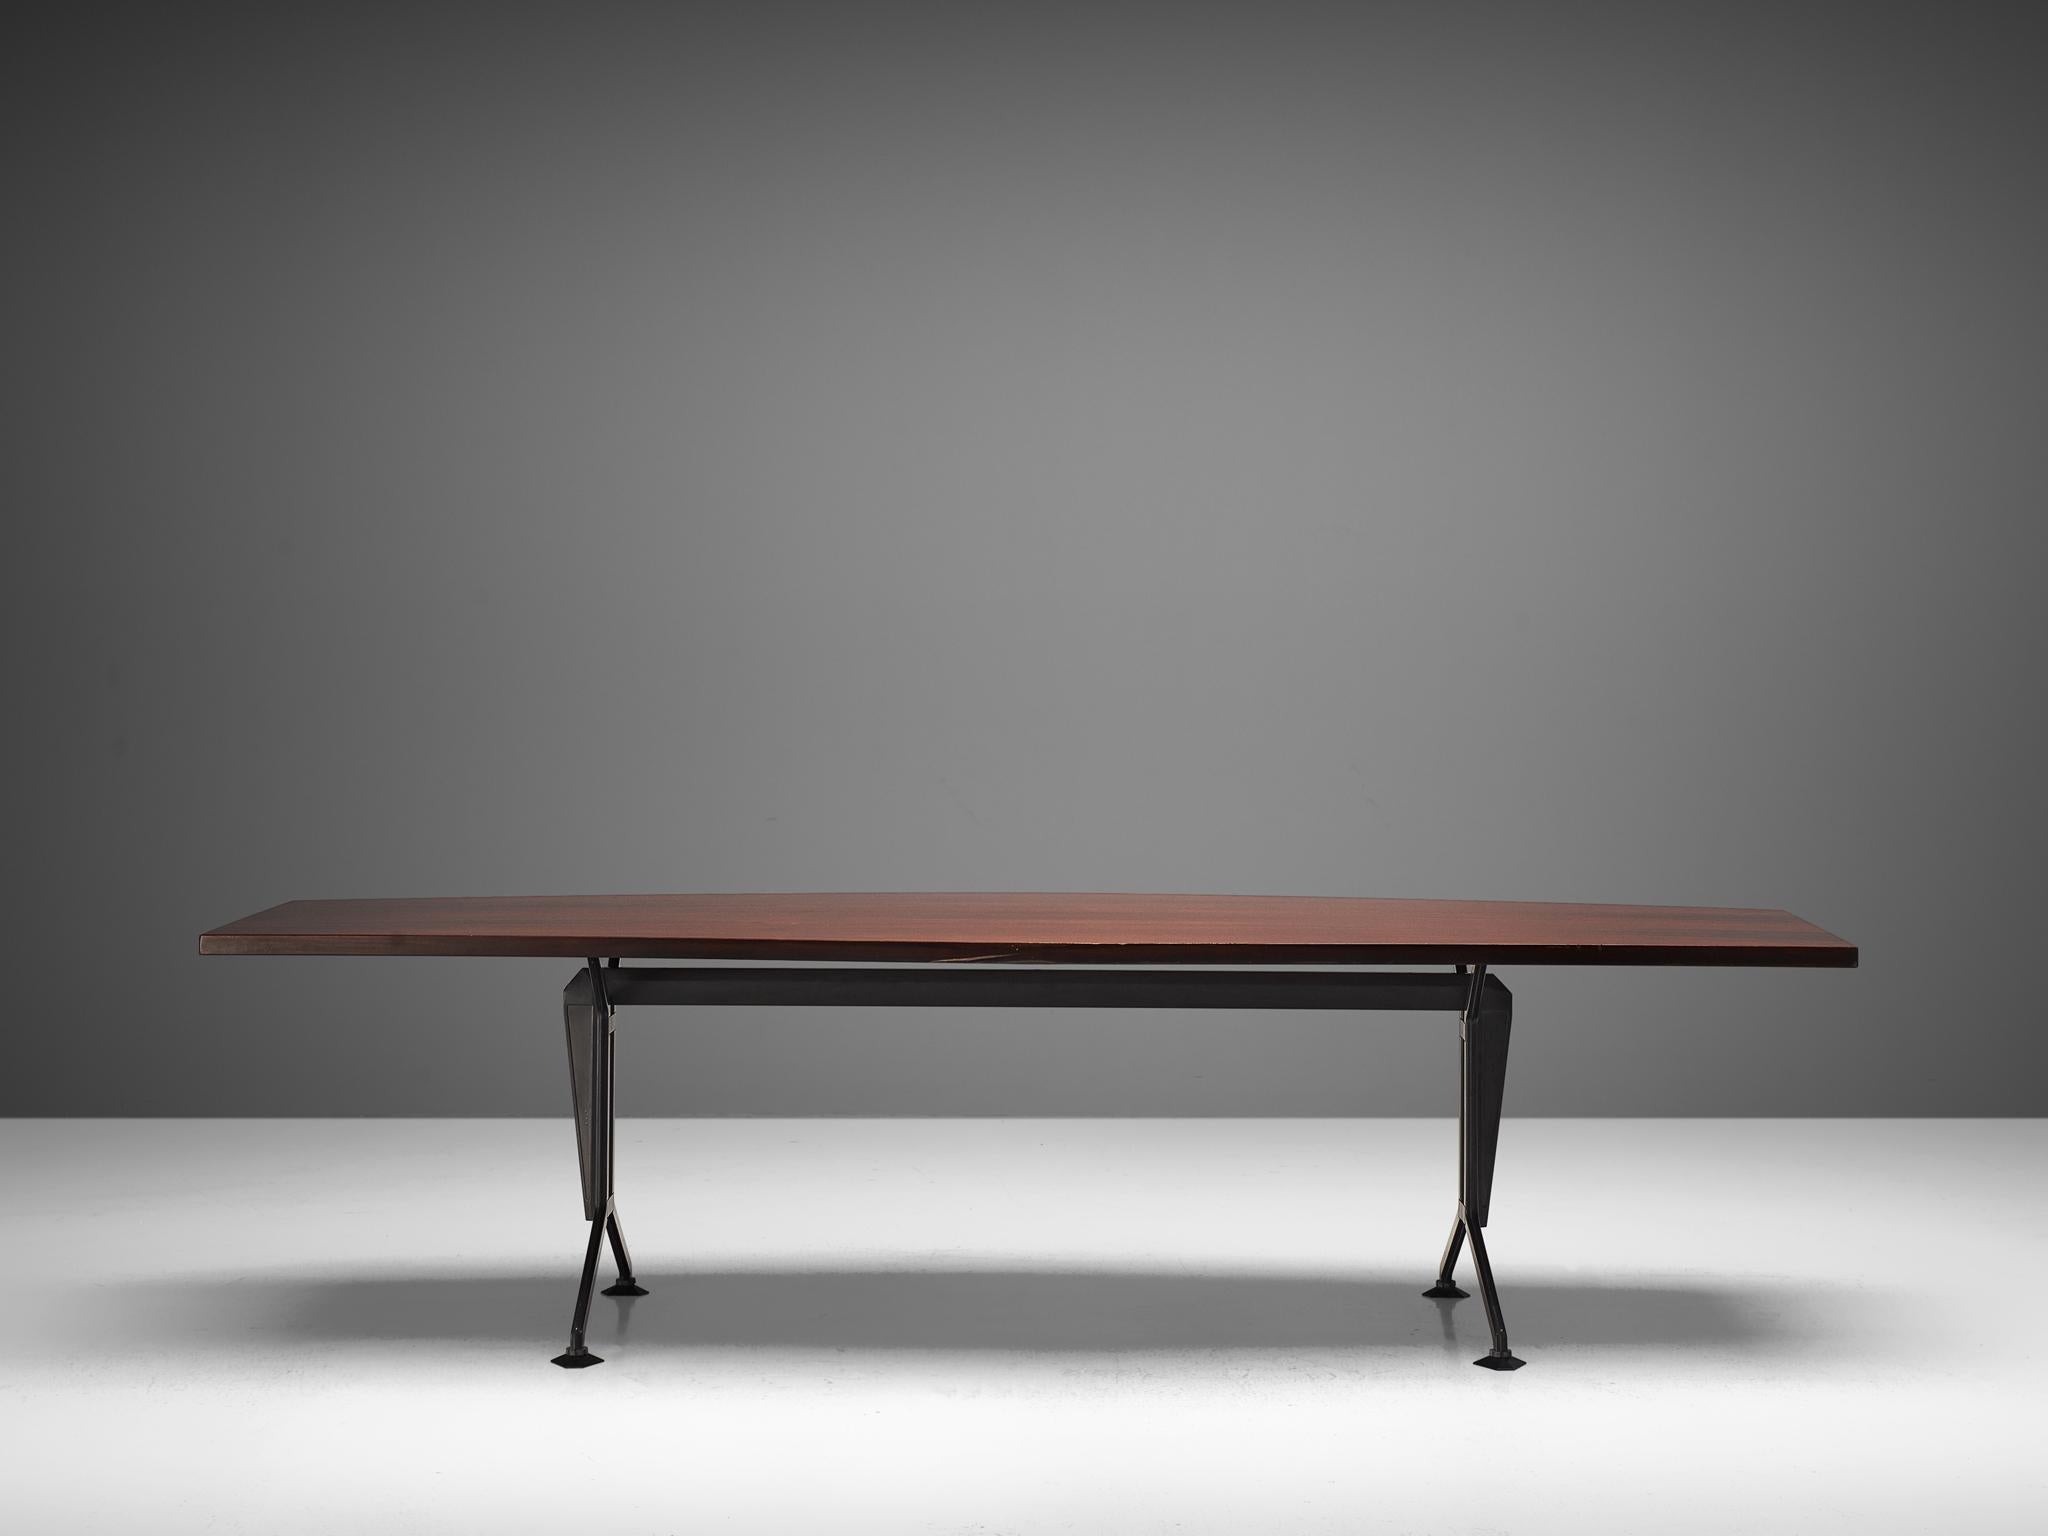 Italian Studio BBPR 'Arco' Conference Table in Rosewood